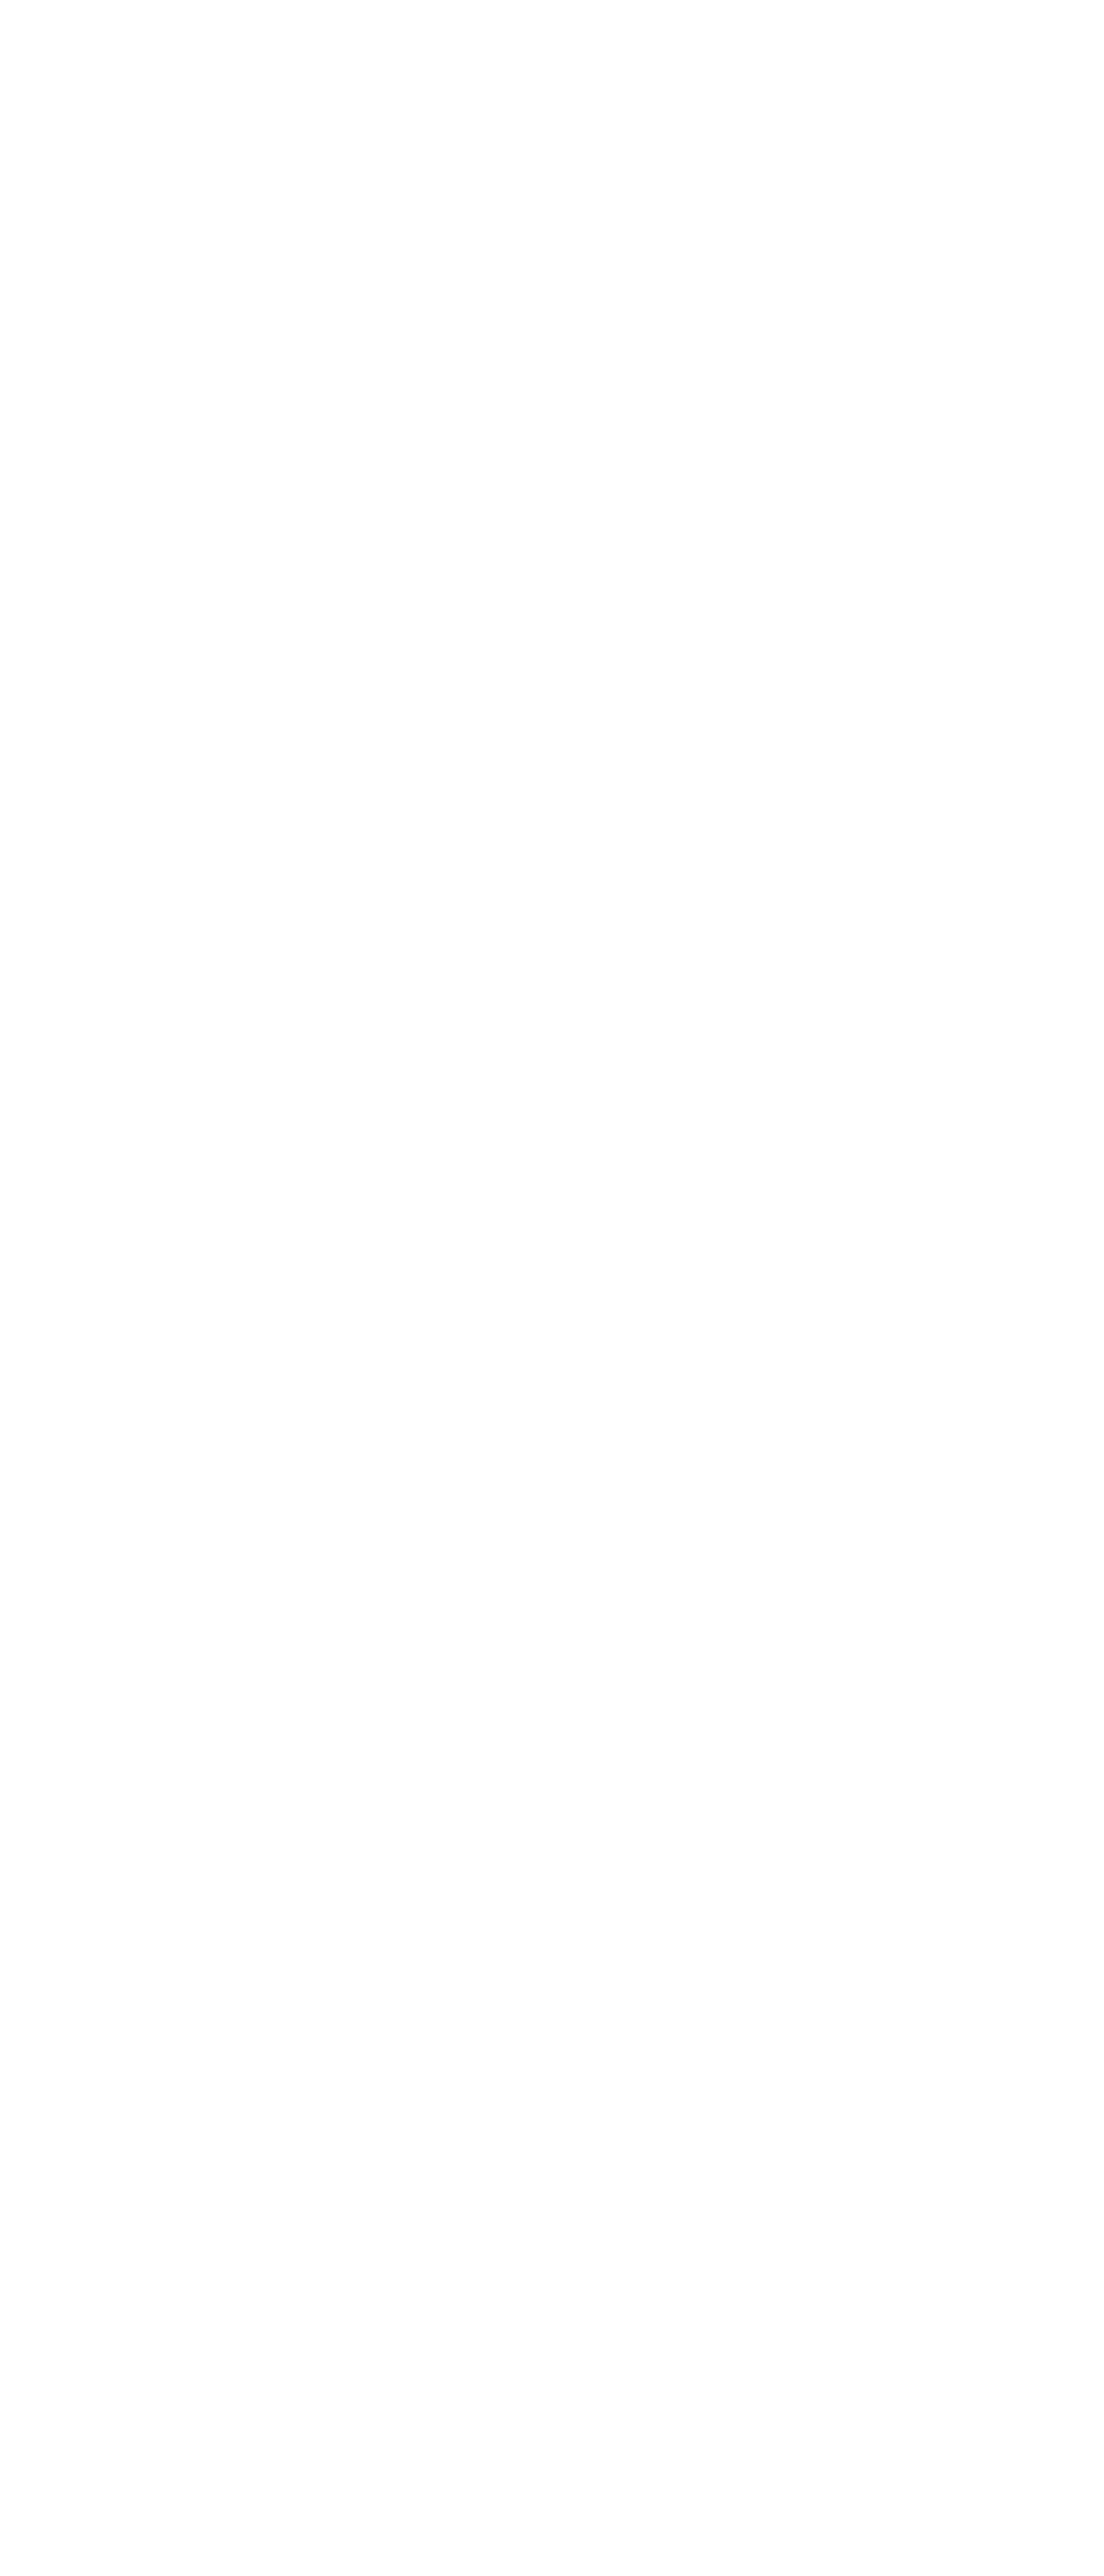 HOUSE OF BATES // POP-UP MUSEUM // CONTENT GALLERY